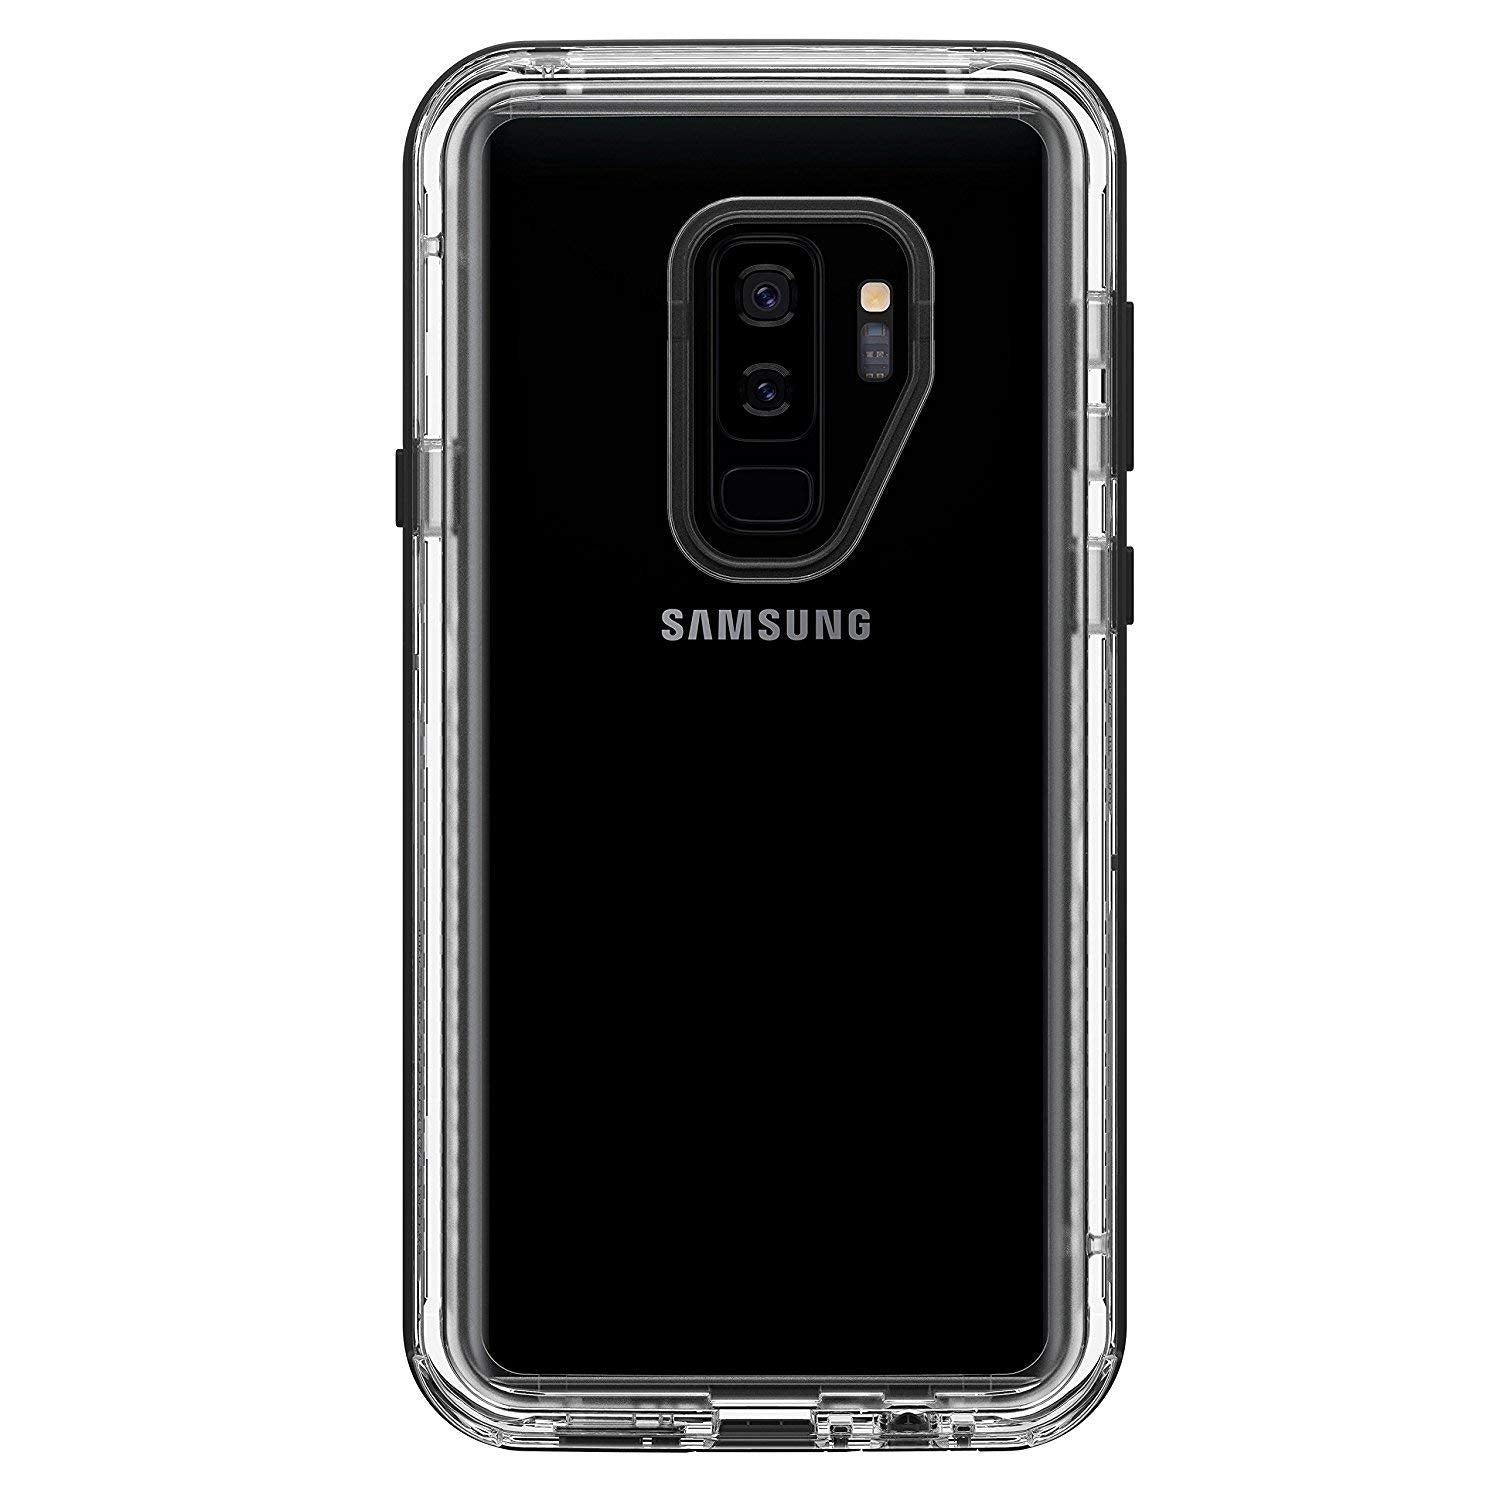 LifeProof NEXT SERIES Case for Galaxy S9 (ONLY) - Black Crystal (Certified Refurbished)